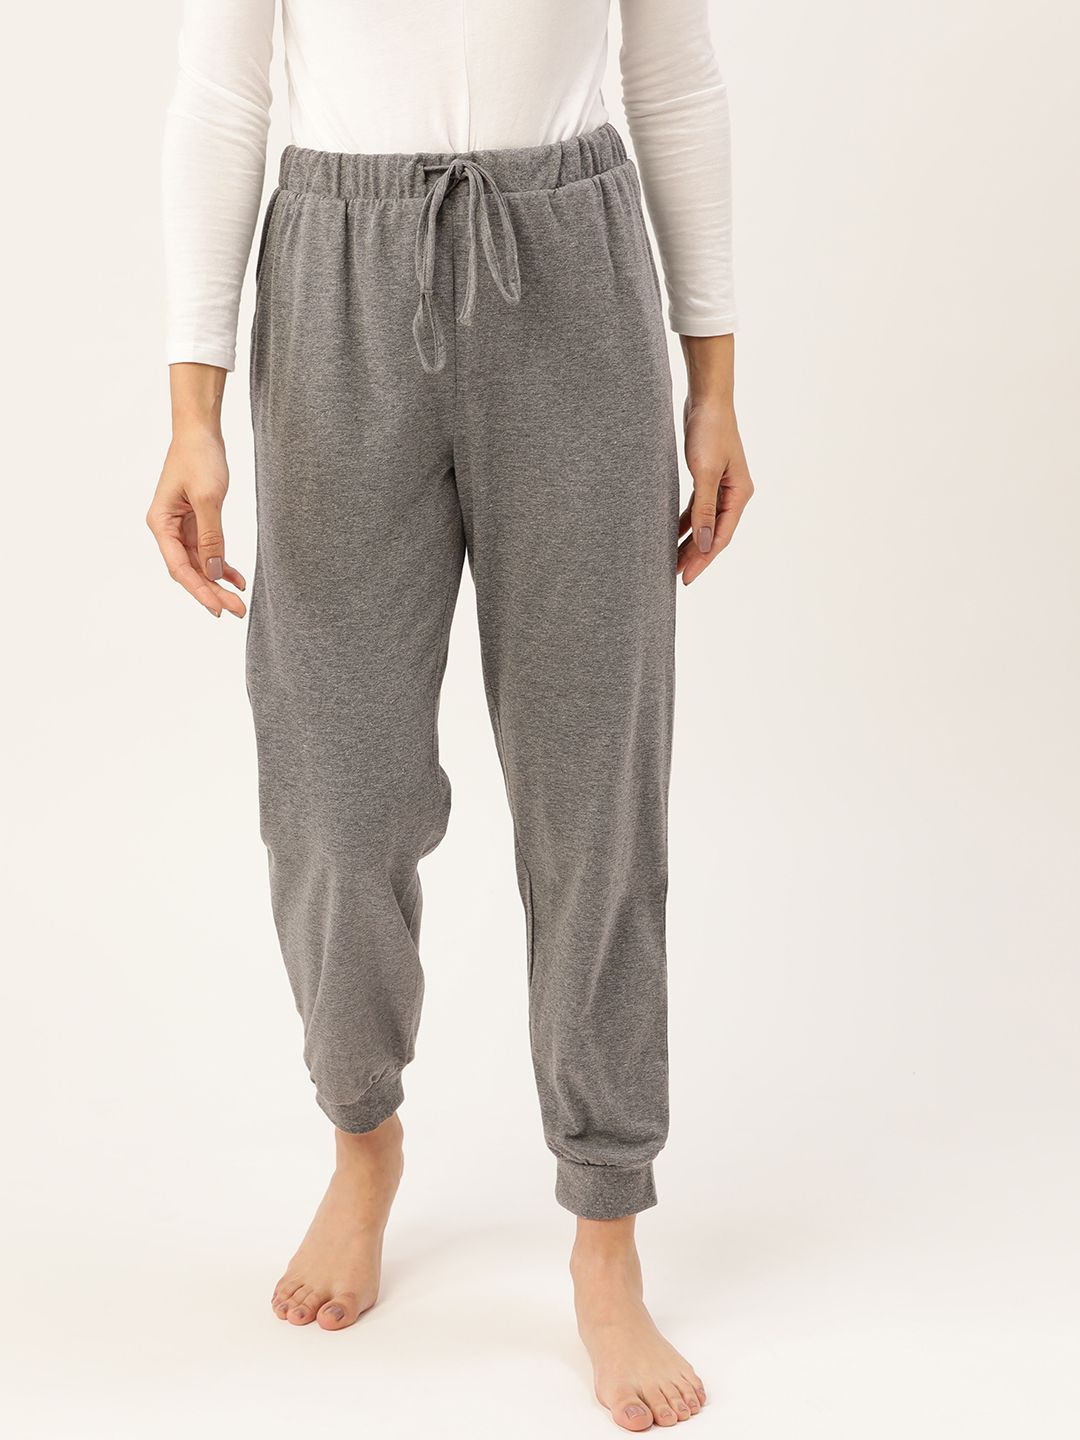 ETC Women Charcoal Grey Solid Lounge Pants Price in India